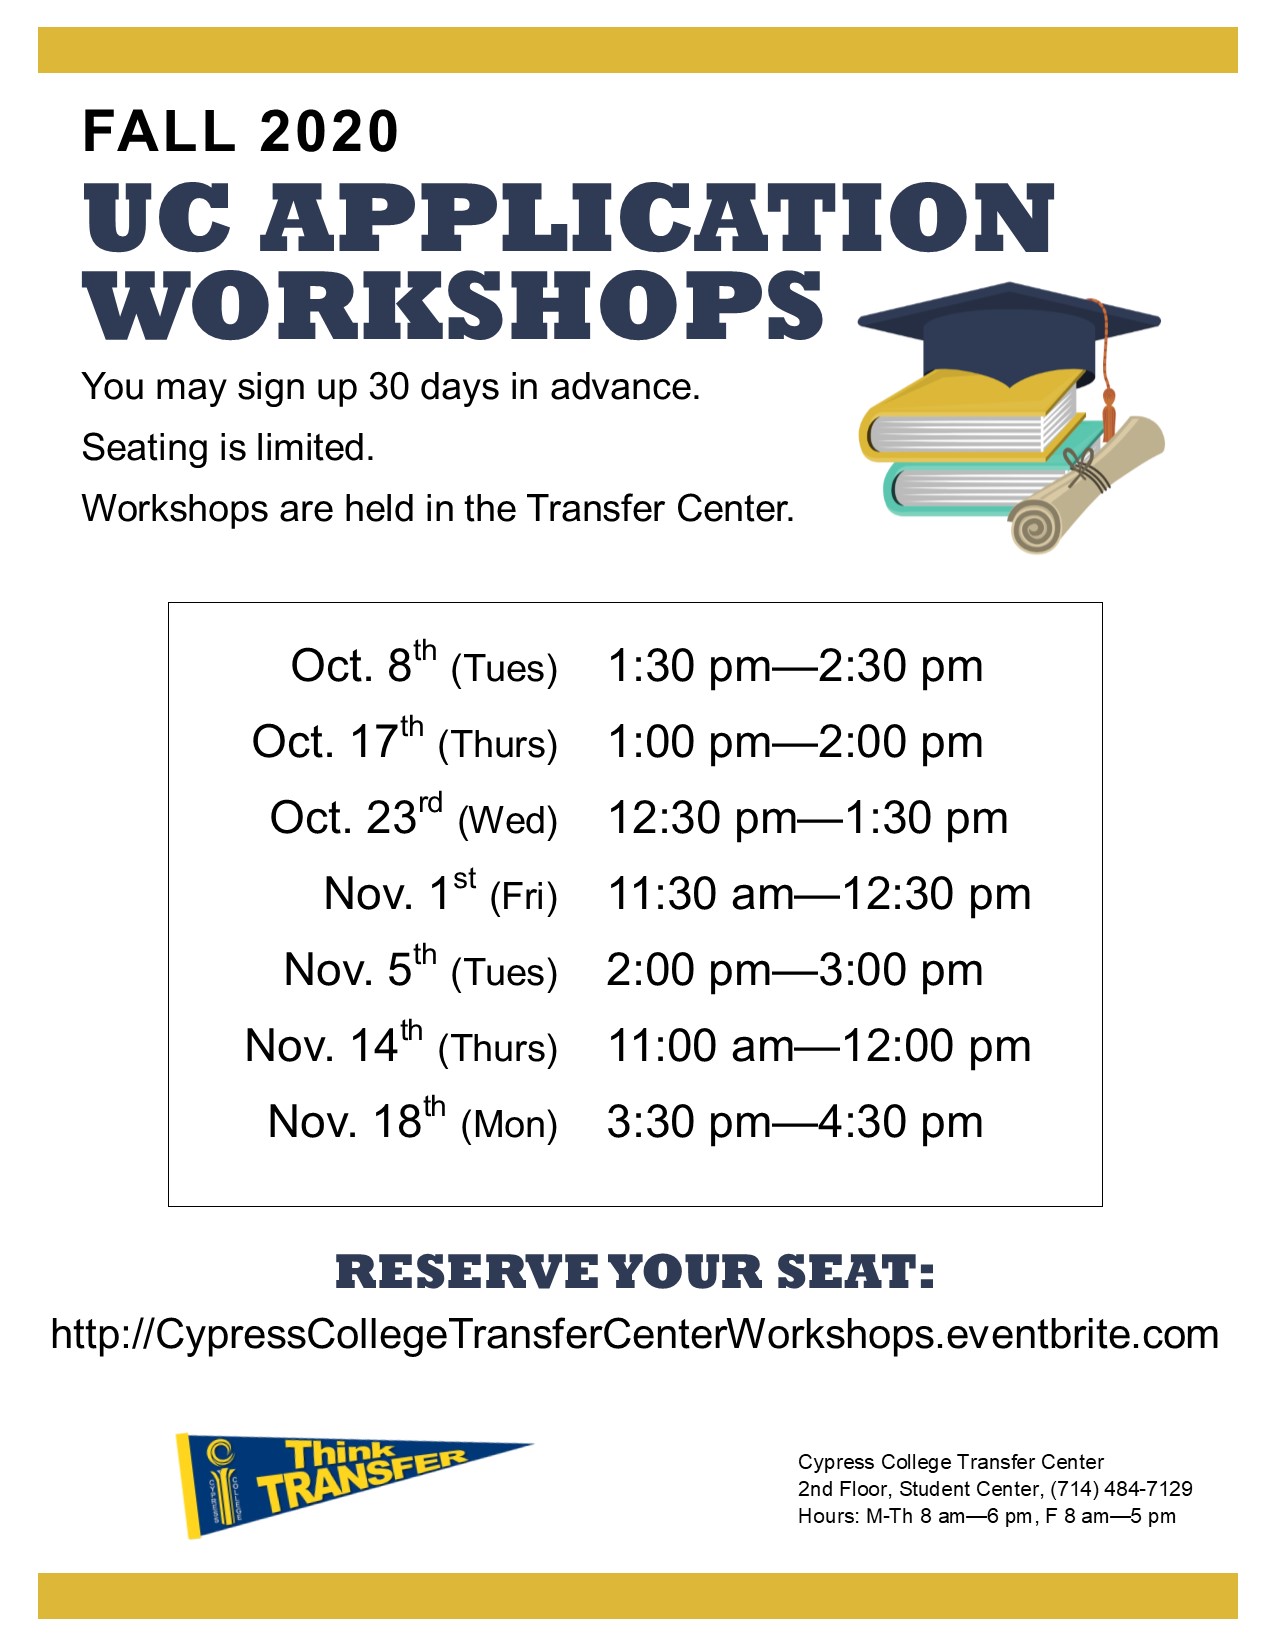 2019 UC application workshops dates and times